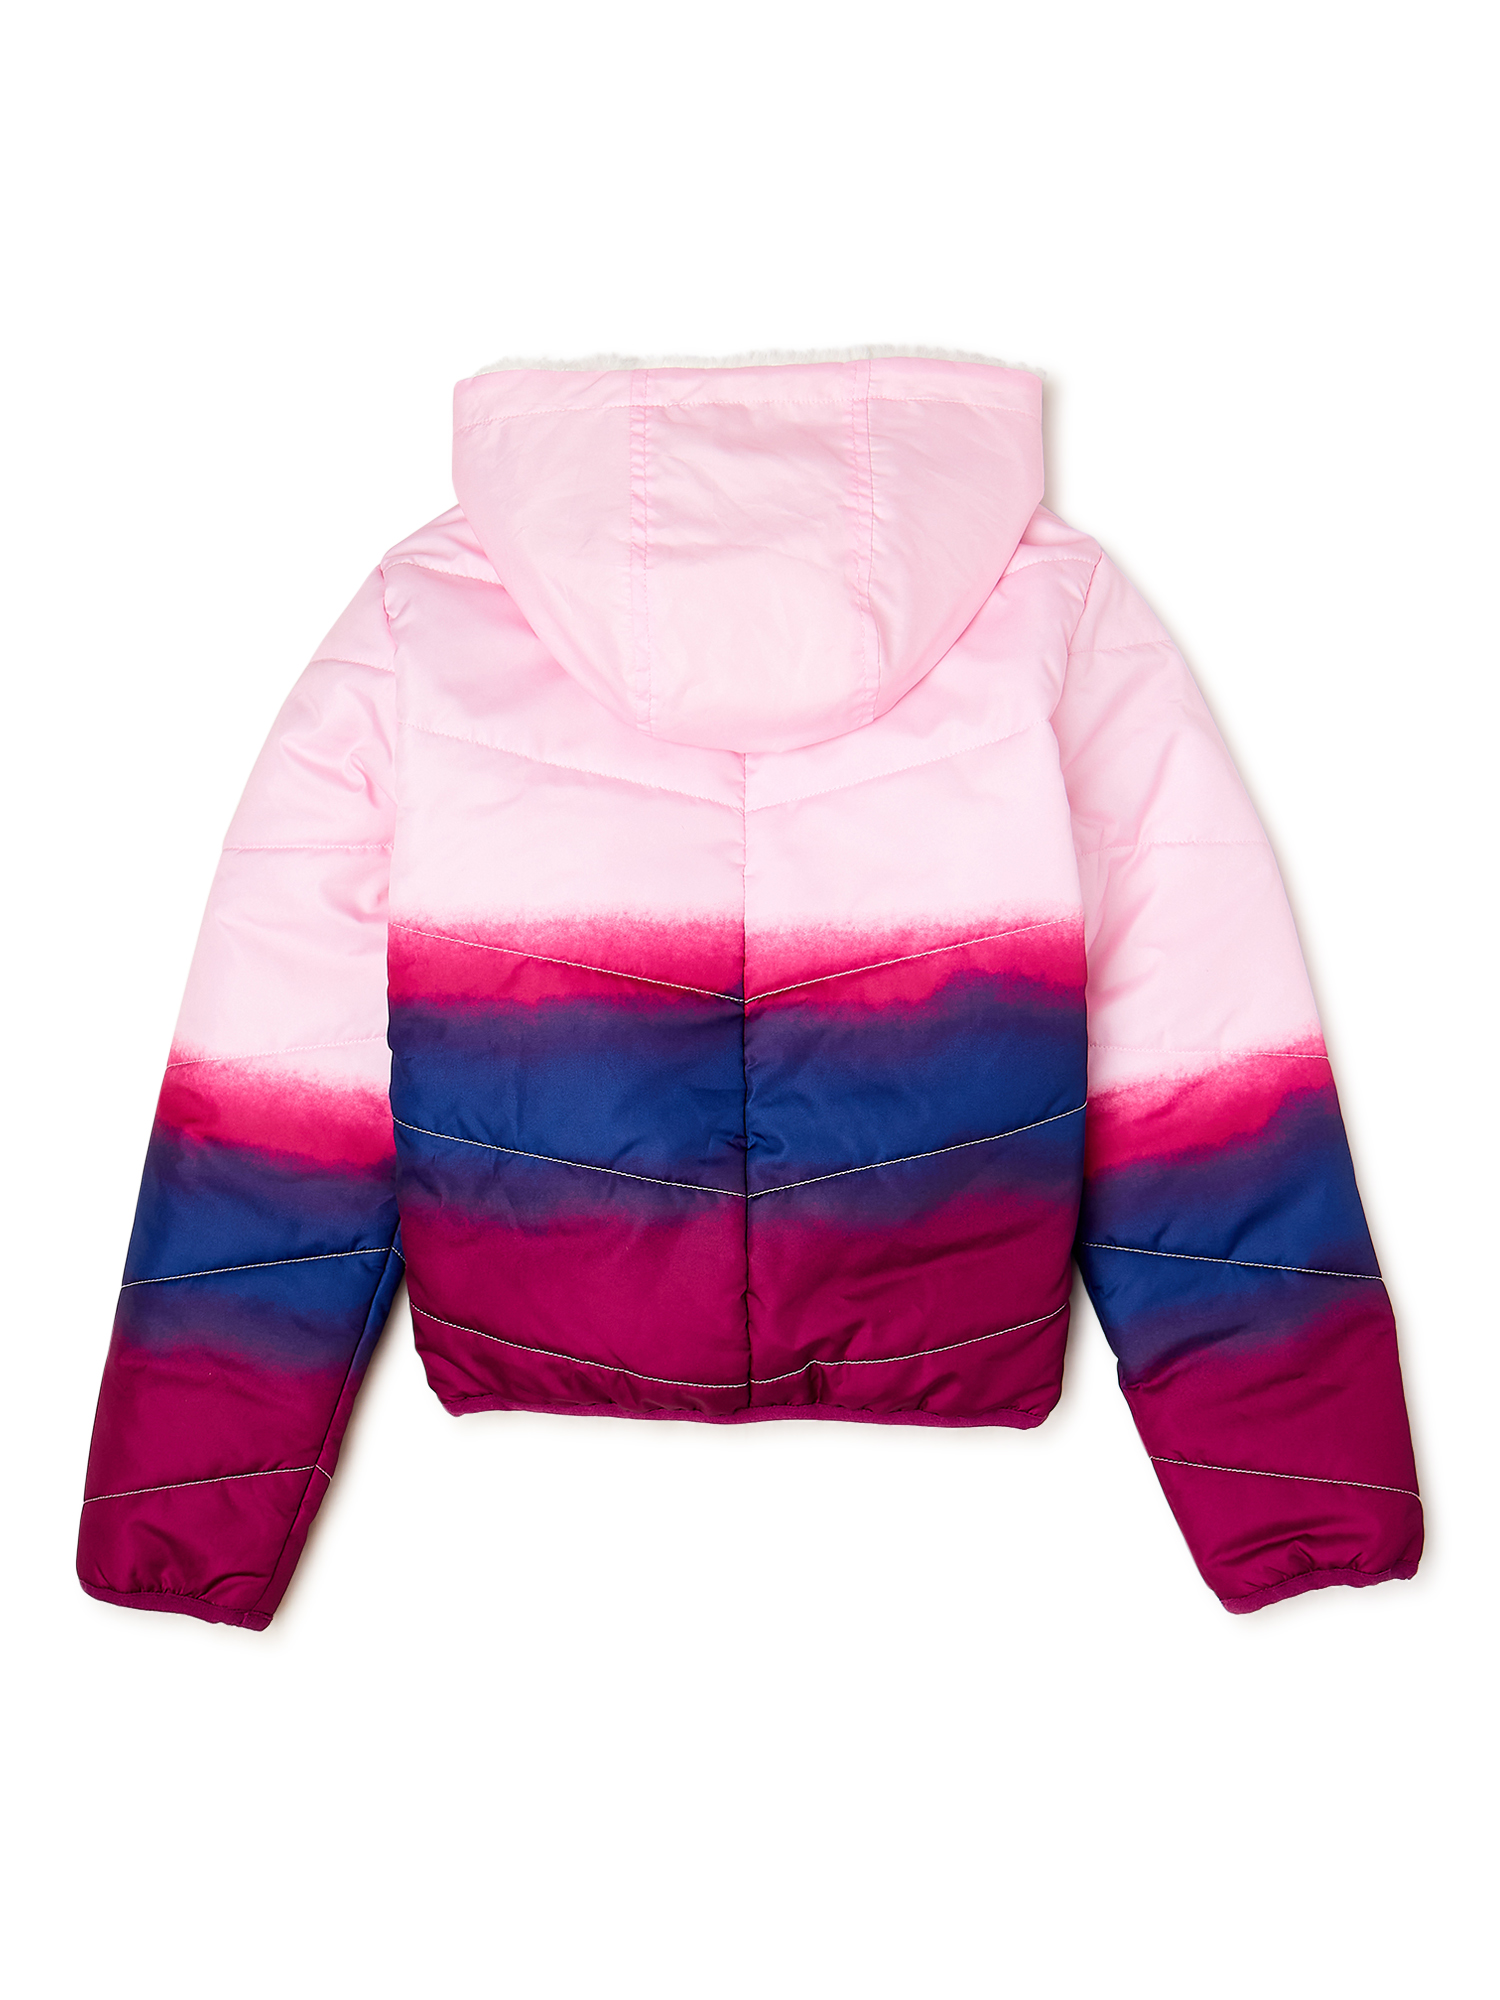 U.S. Polo Assn. Girls’ Dip-Dye Hooded Puffer Jacket with Faux Fur Lining, Sizes 4-16 - image 2 of 3